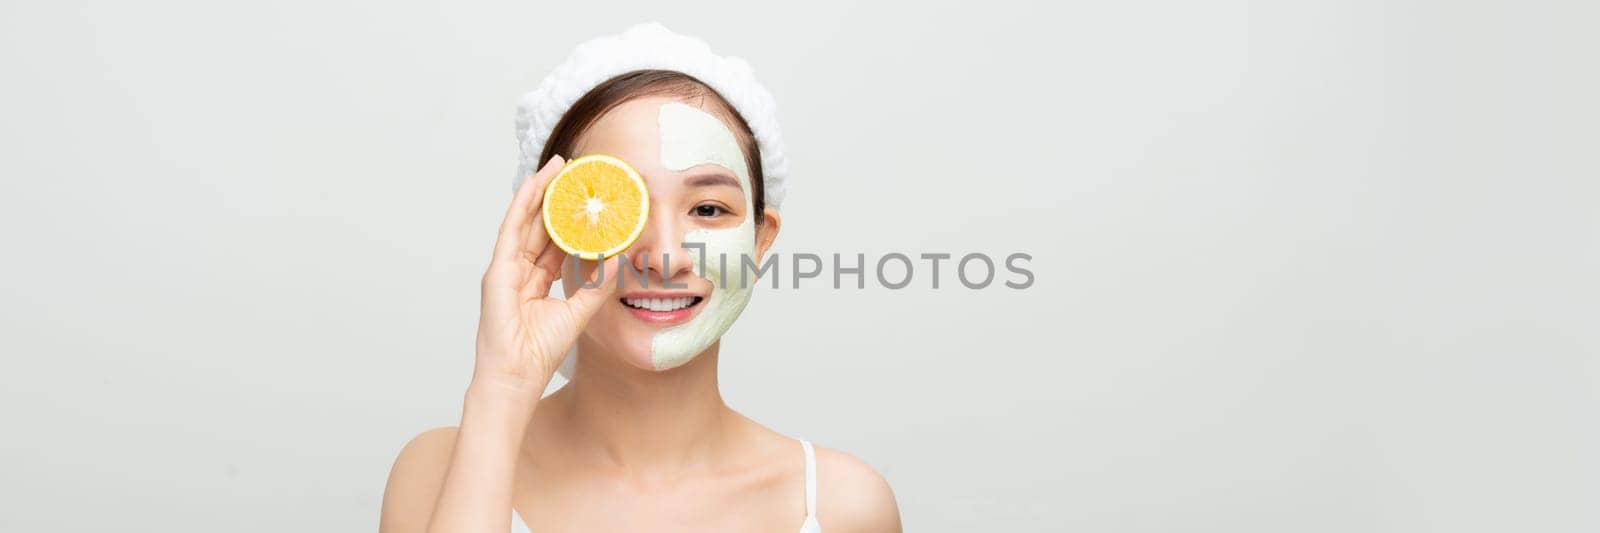 Smiling woman with orange slice and mud mask on face for web banner by makidotvn